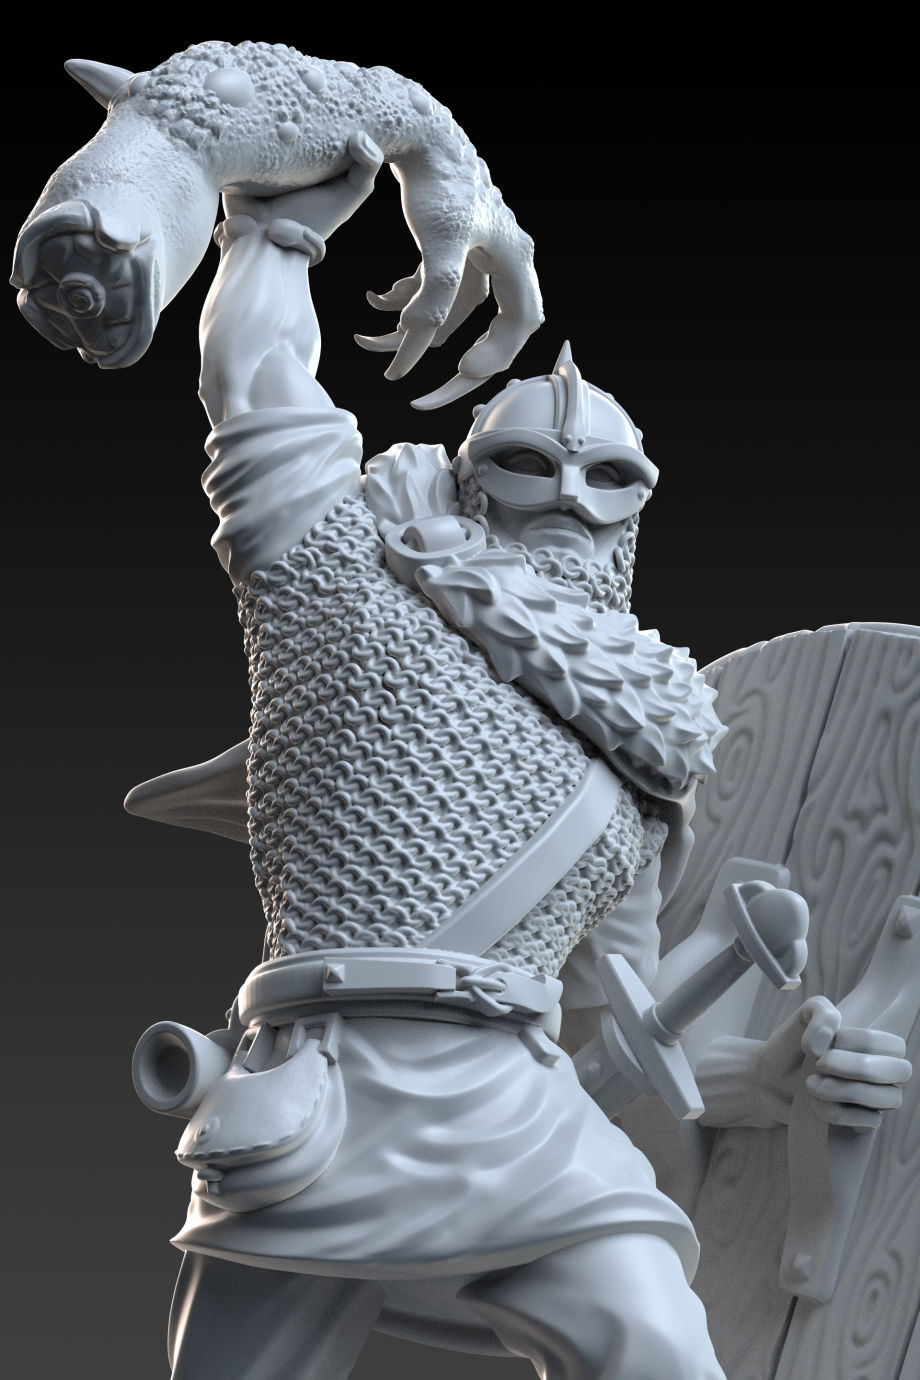 minatures in zbrush